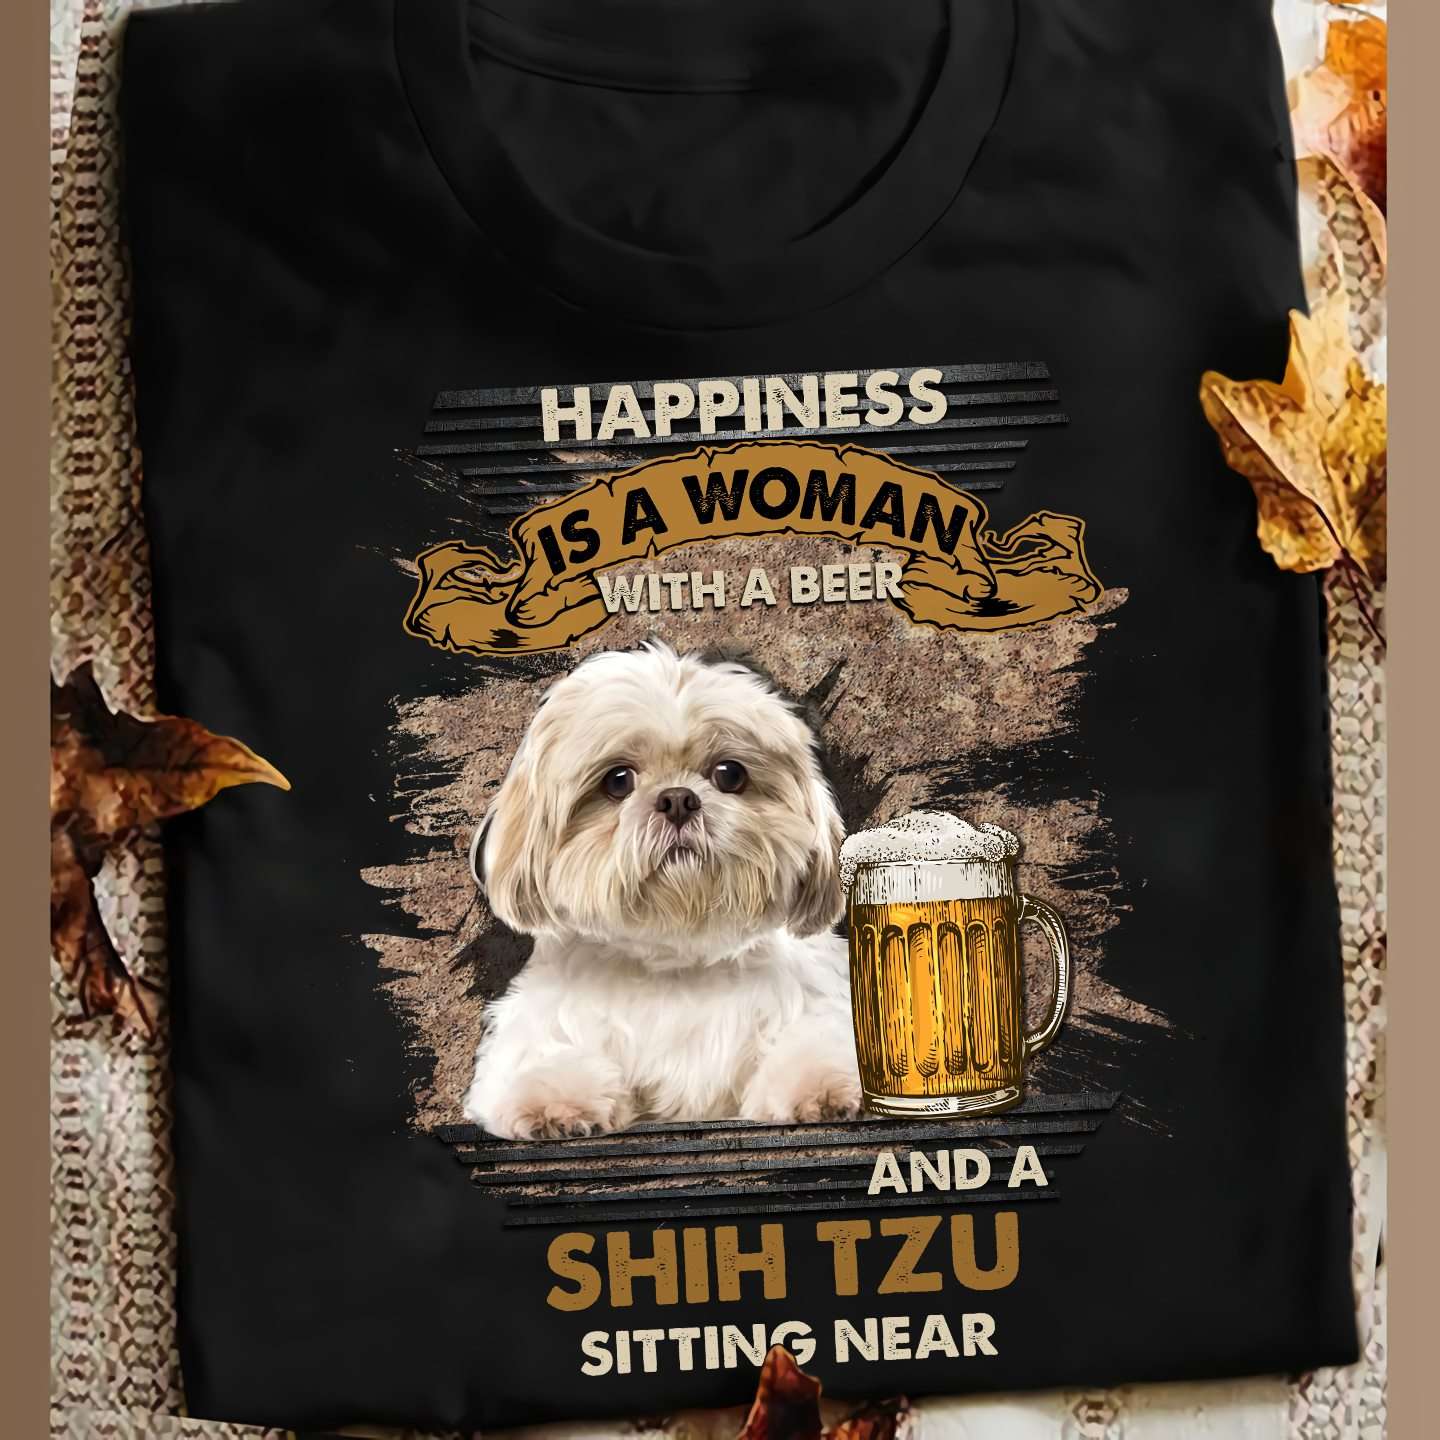 Shih Tzu Beer - Happiness is a woman with a beer and a shih tzu sitting near